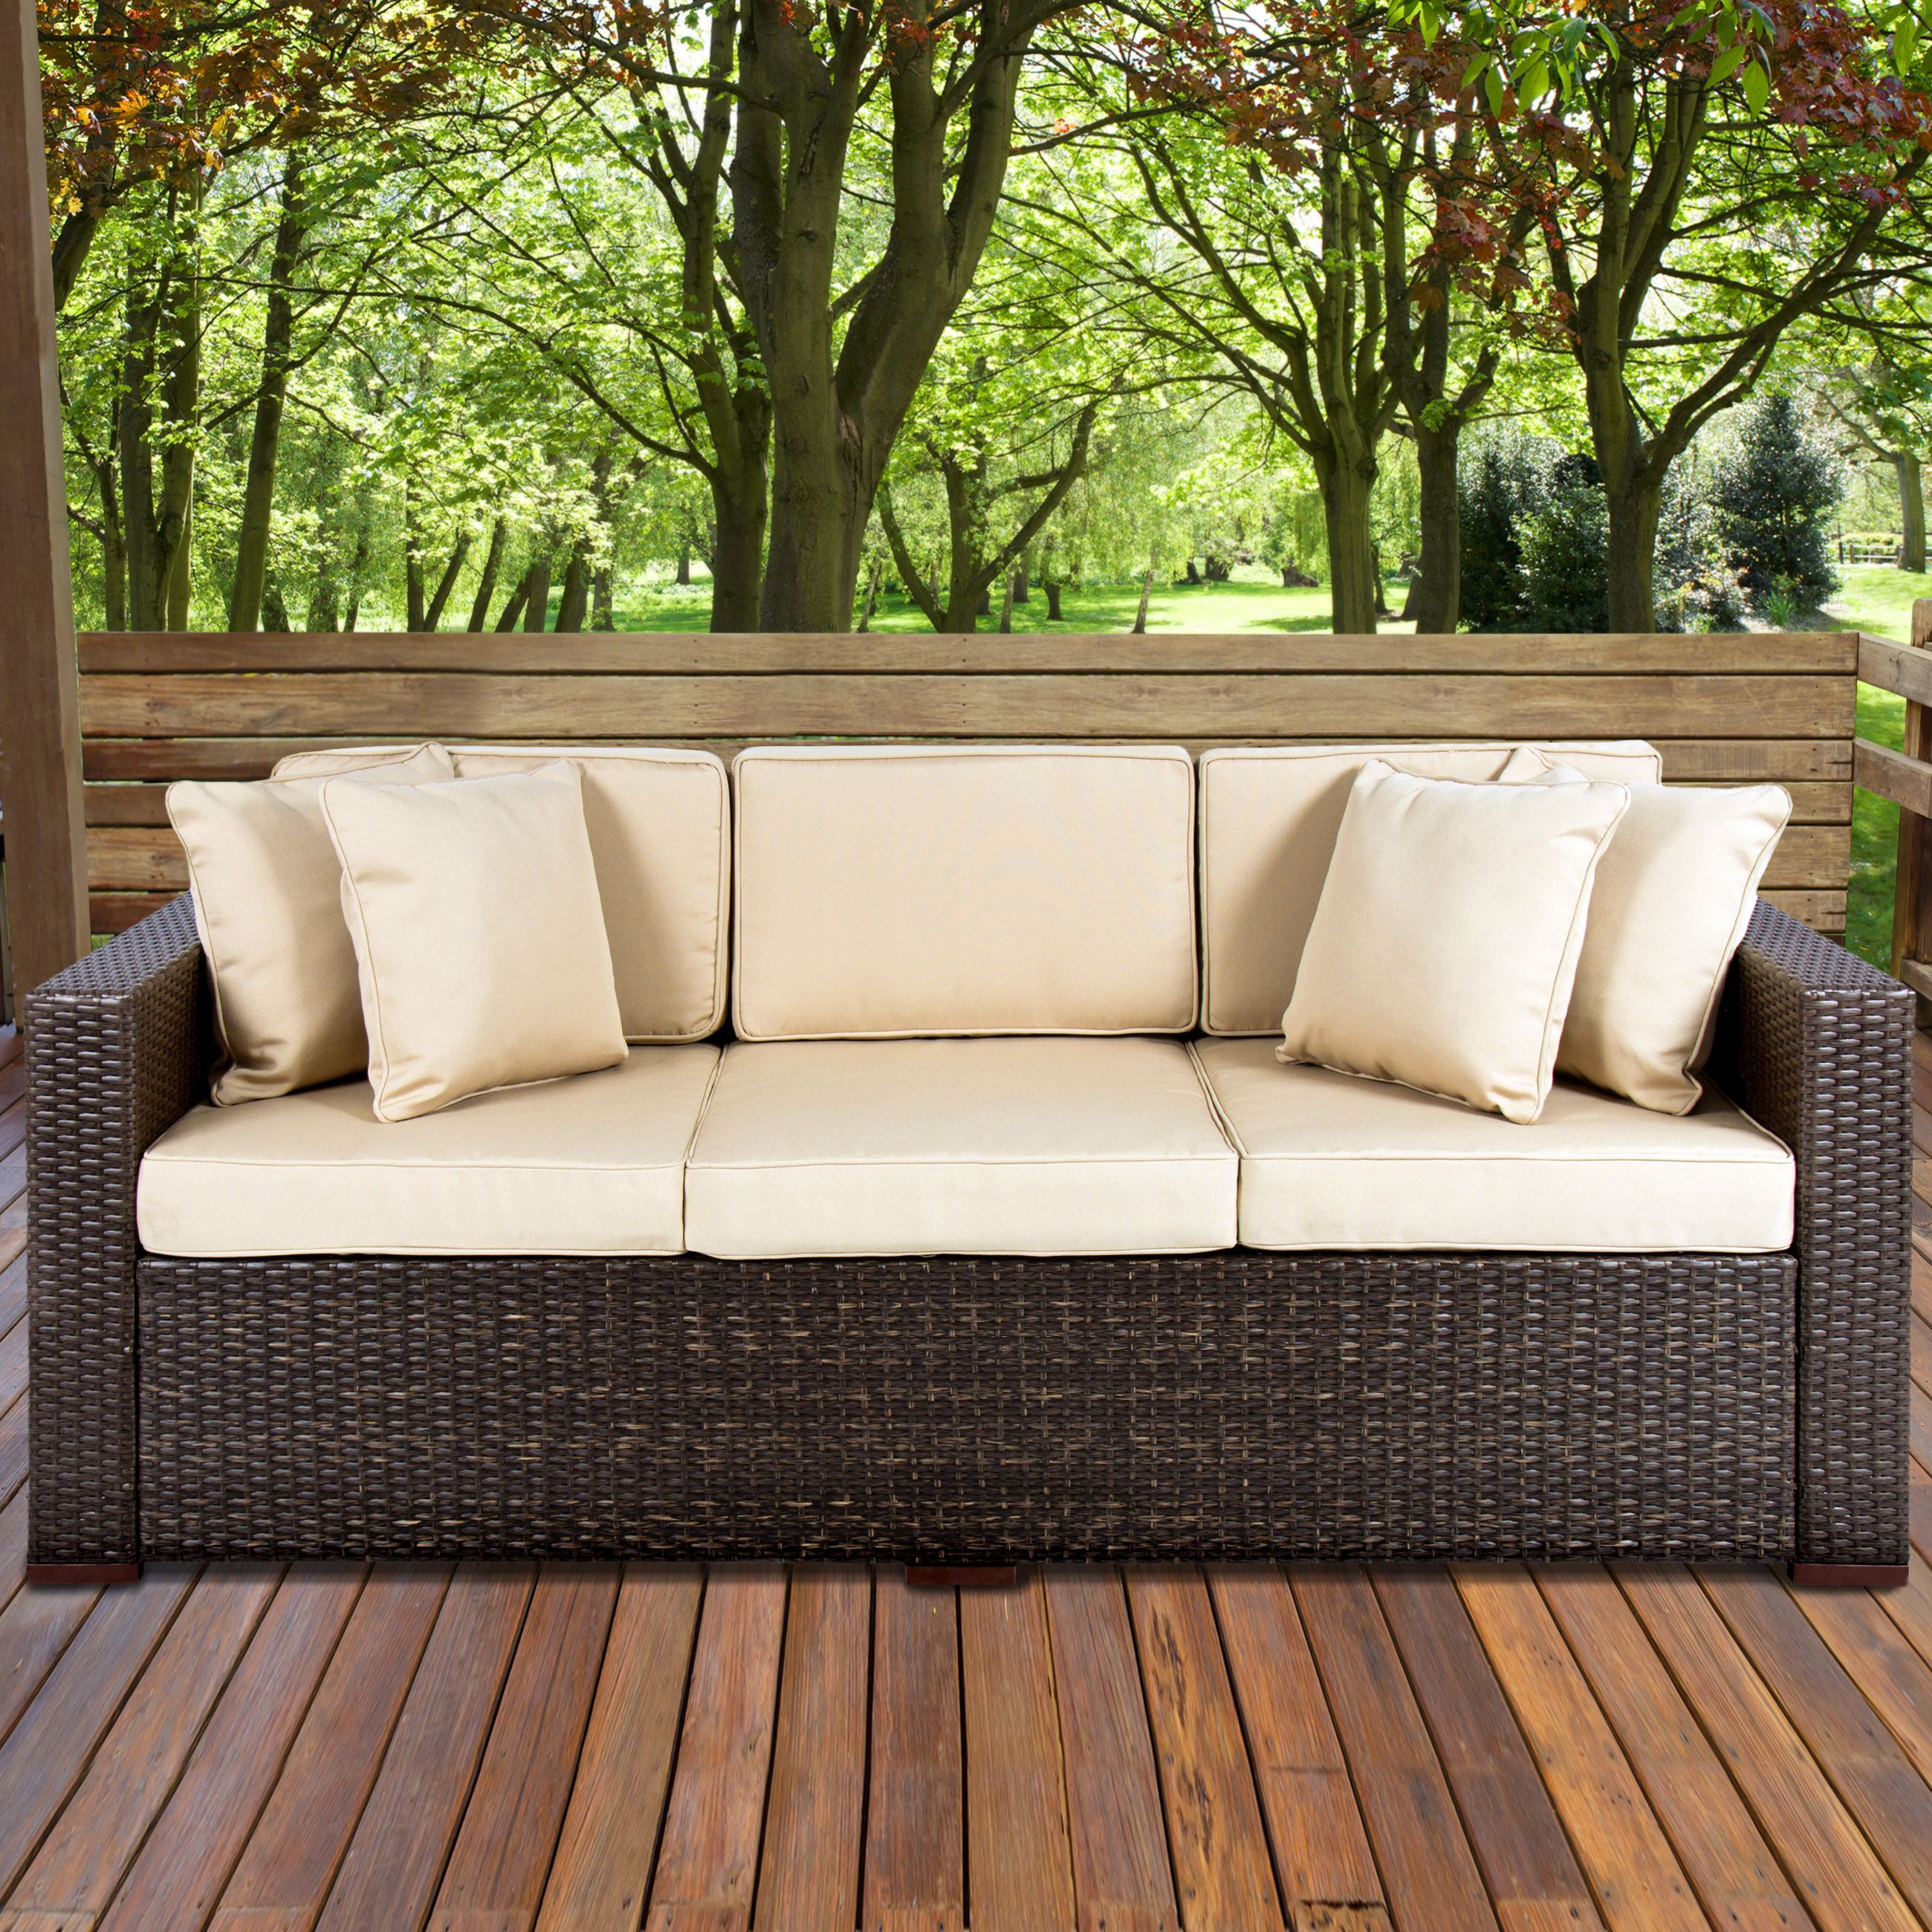 Lorentzen Patio Sectionals With Cushions With Most Recent Outdoor Sofa Furniture Brilliant Lorentzen Patio Sectional (View 14 of 20)